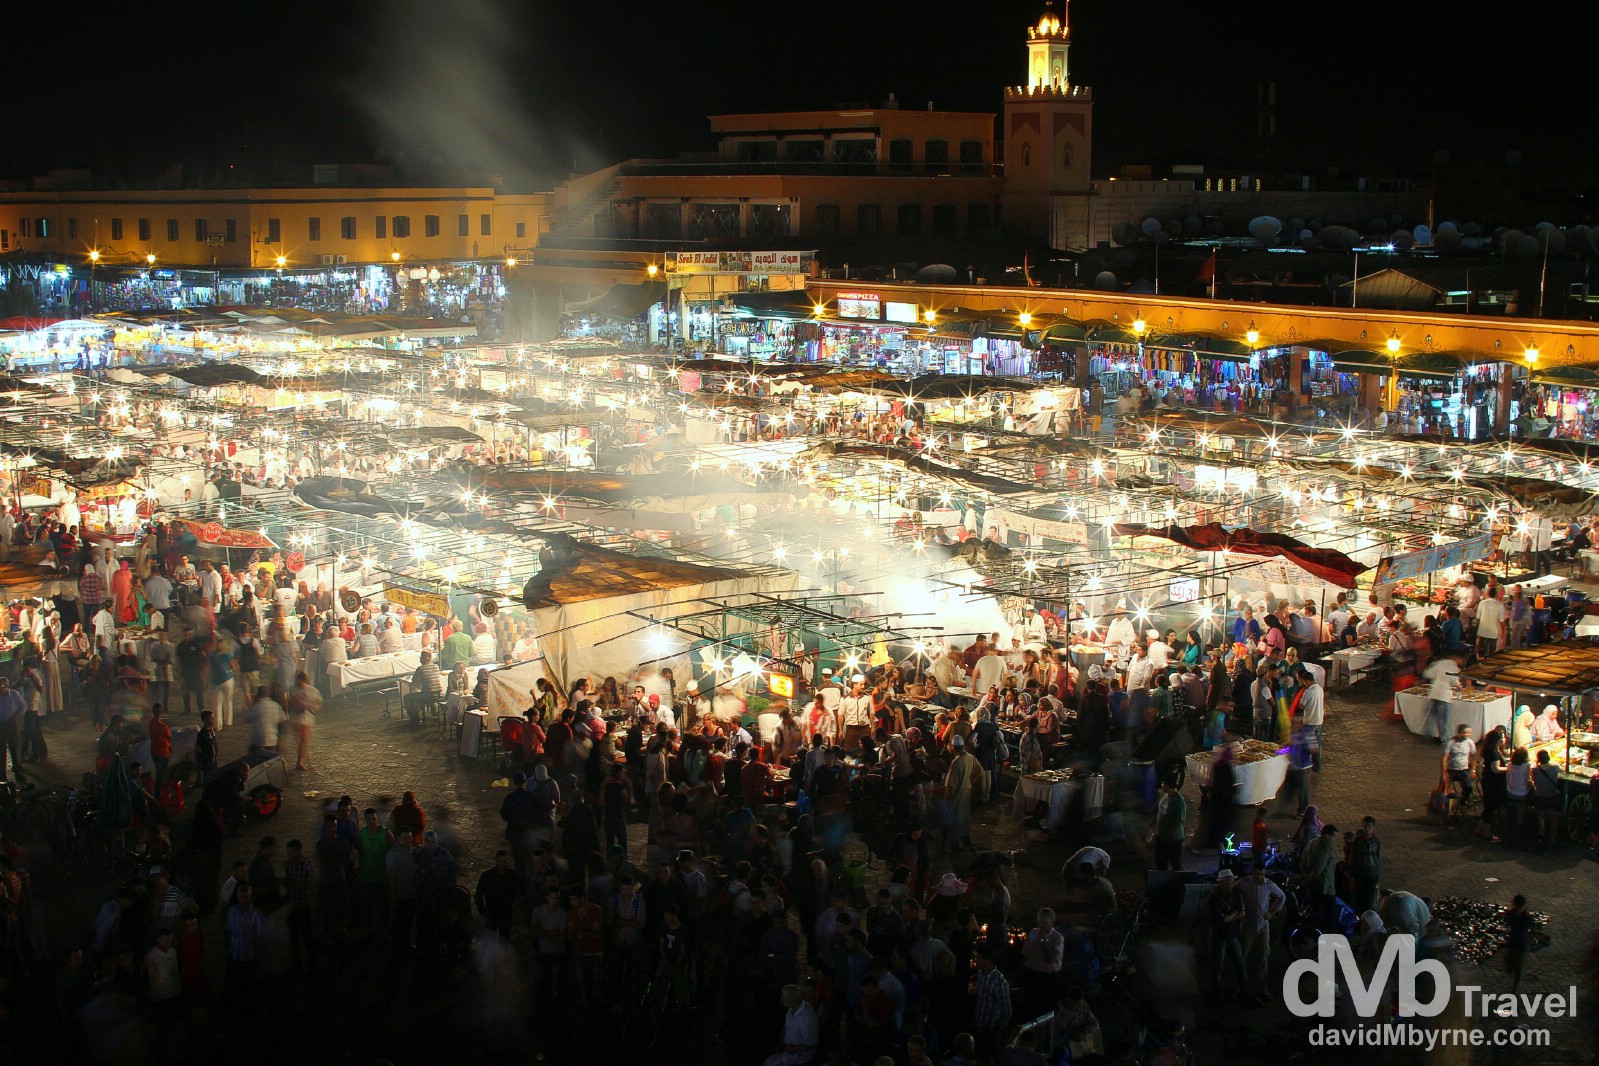 The food stalls erected nightly in the centre of the Djemma El-Fna, Marrakesh, Morocco. May 11th, 2014.